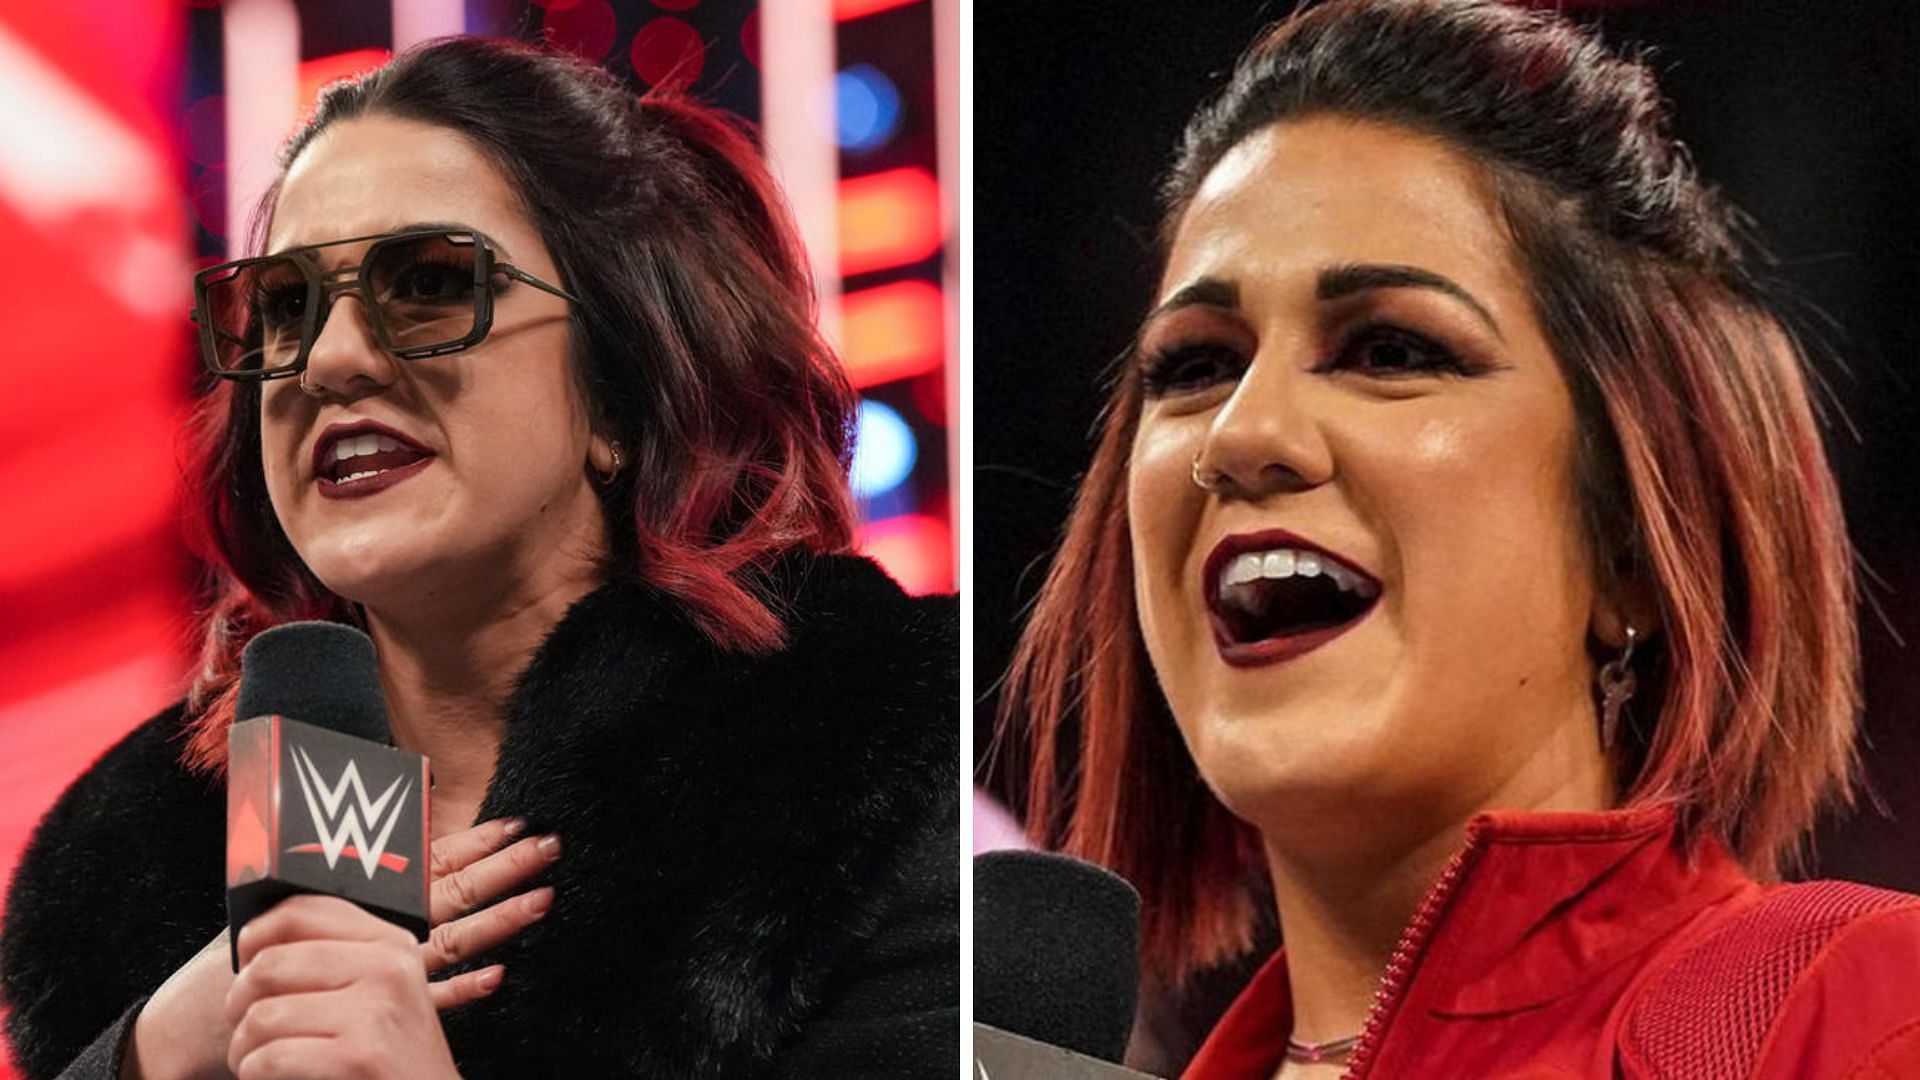 Bayley and Becky Lynch are currently in a rivalry on WWE RAW.